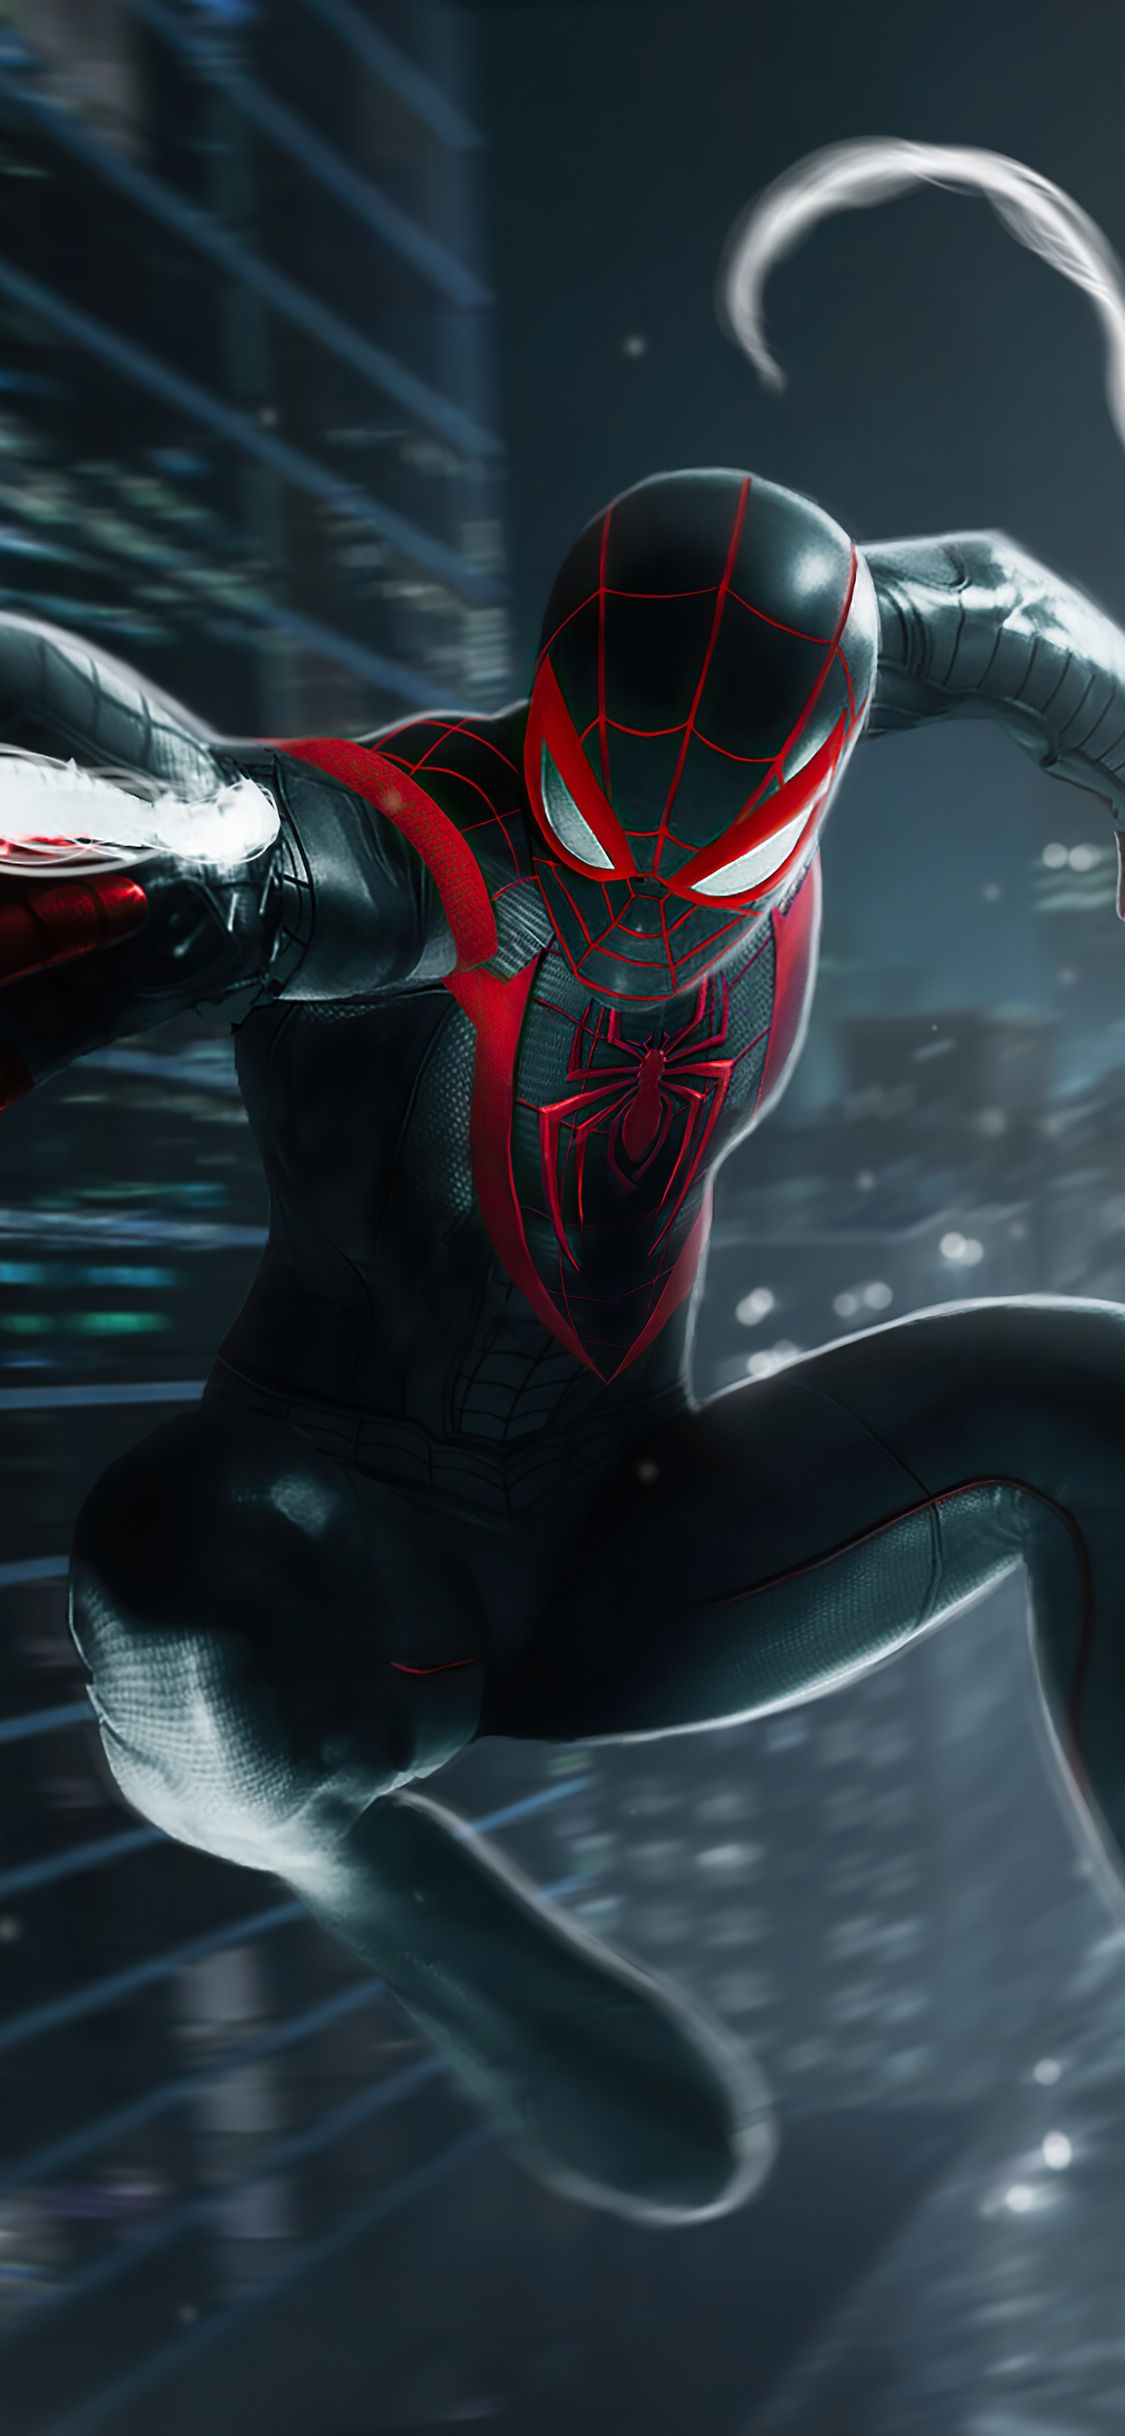 4k Spider Man Miles Morales 2020 iPhone XS, iPhone iPhone X HD 4k Wallpaper, Image, Background, Photo and Picture